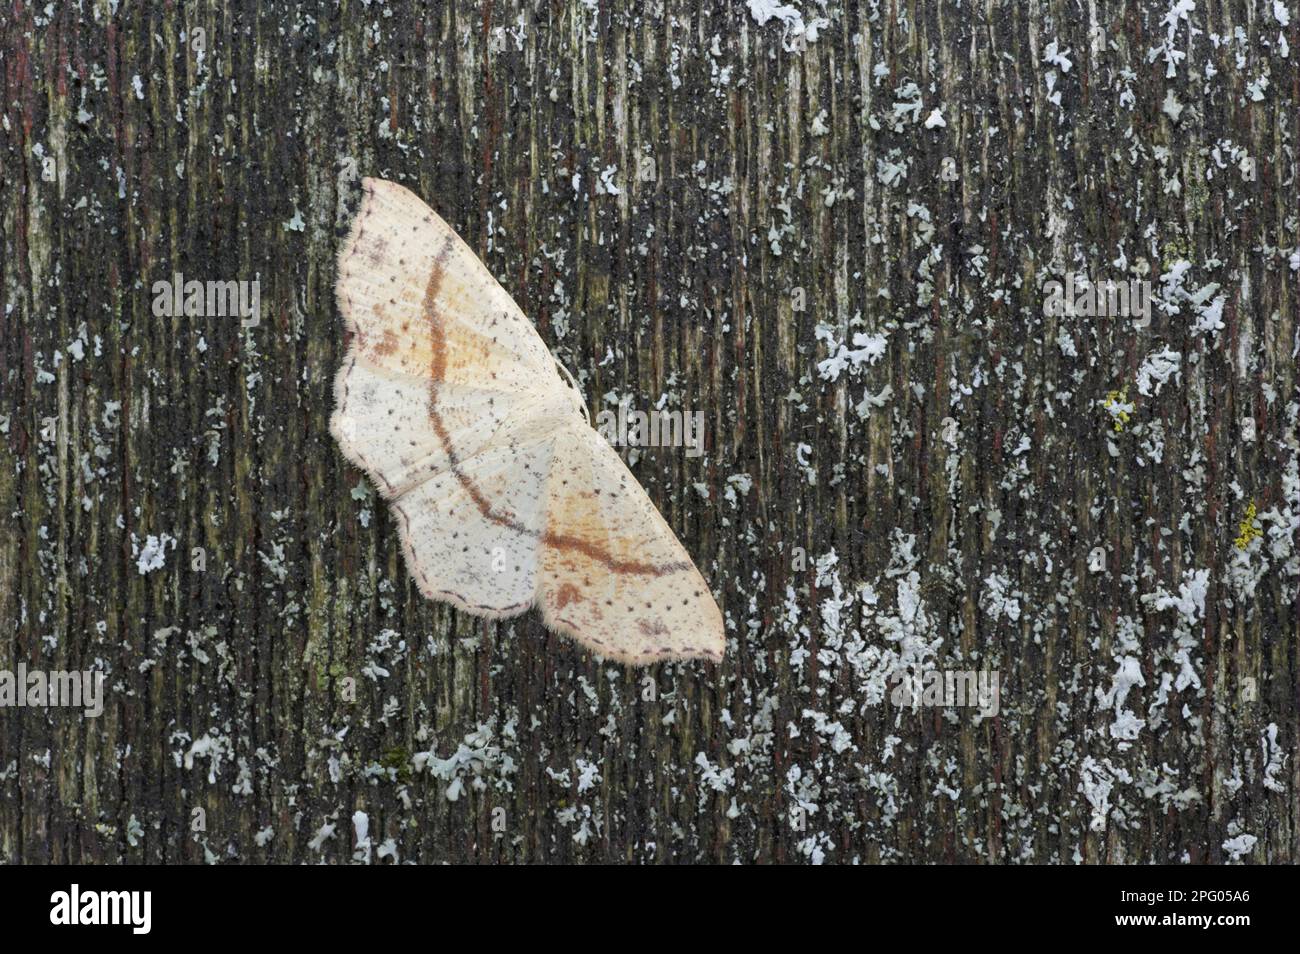 Spotted Oak Girdlewing Moth (Cyclophora punctaria), Grey Girdlewing Moth, Insects, Moths, Butterflies, Animals, Other Animals, Maiden's Blush adult Stock Photo